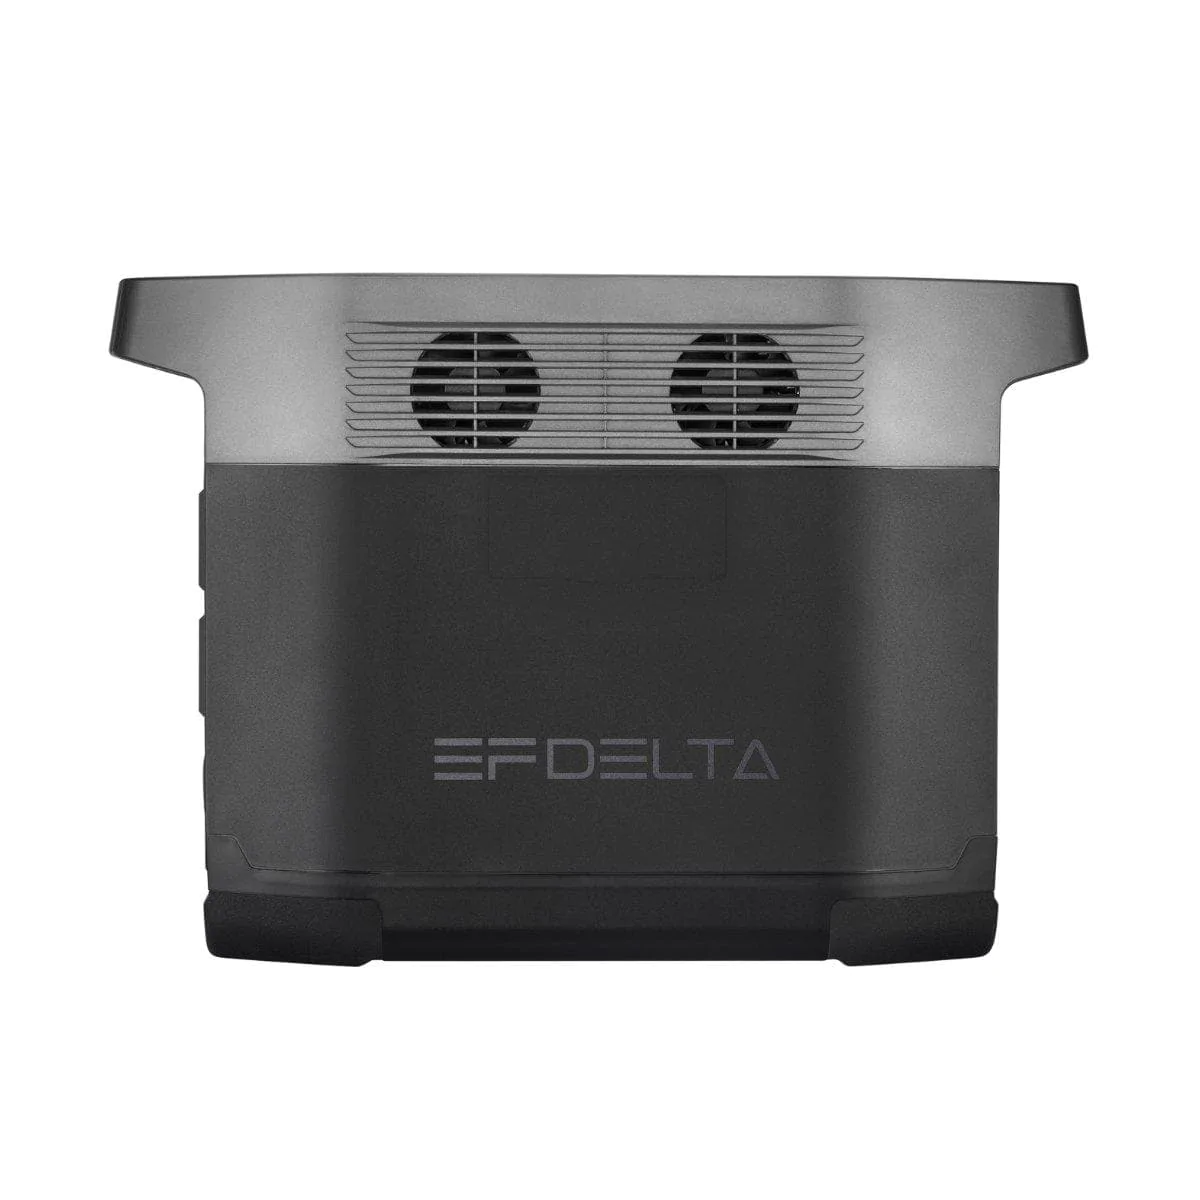 EcoFlow Delta: High-Capacity Portable Power Station for Backup Power, RV Living, Outdoor Adventures and More - 1300-1350 Watt-hours